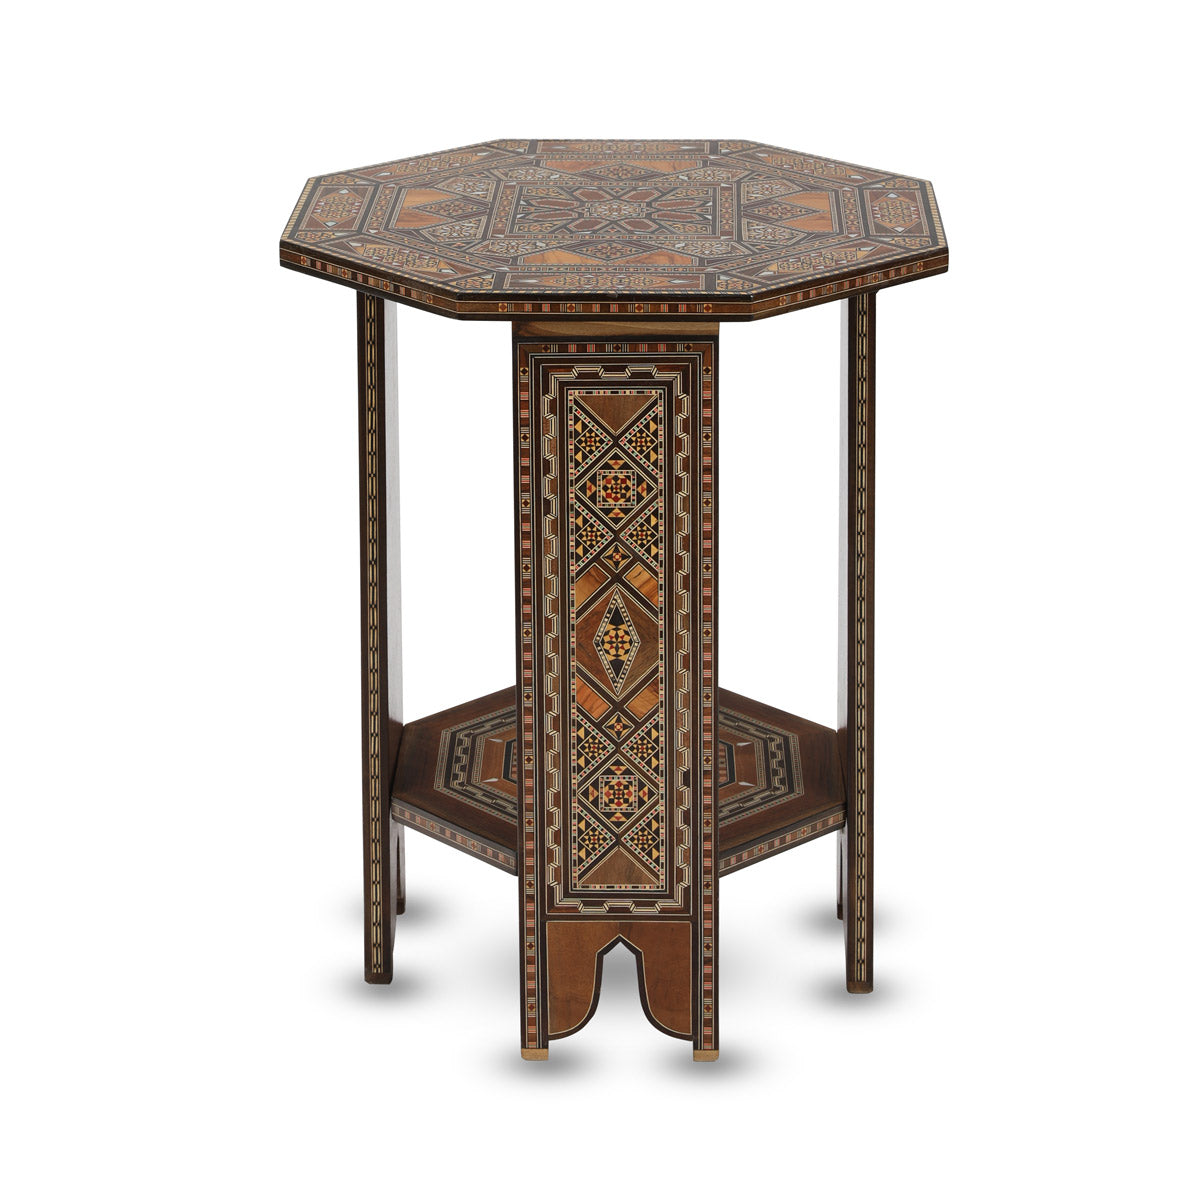 Front View of Syrian Mosaic Patterned Marquetry Inlaid  Wood Table